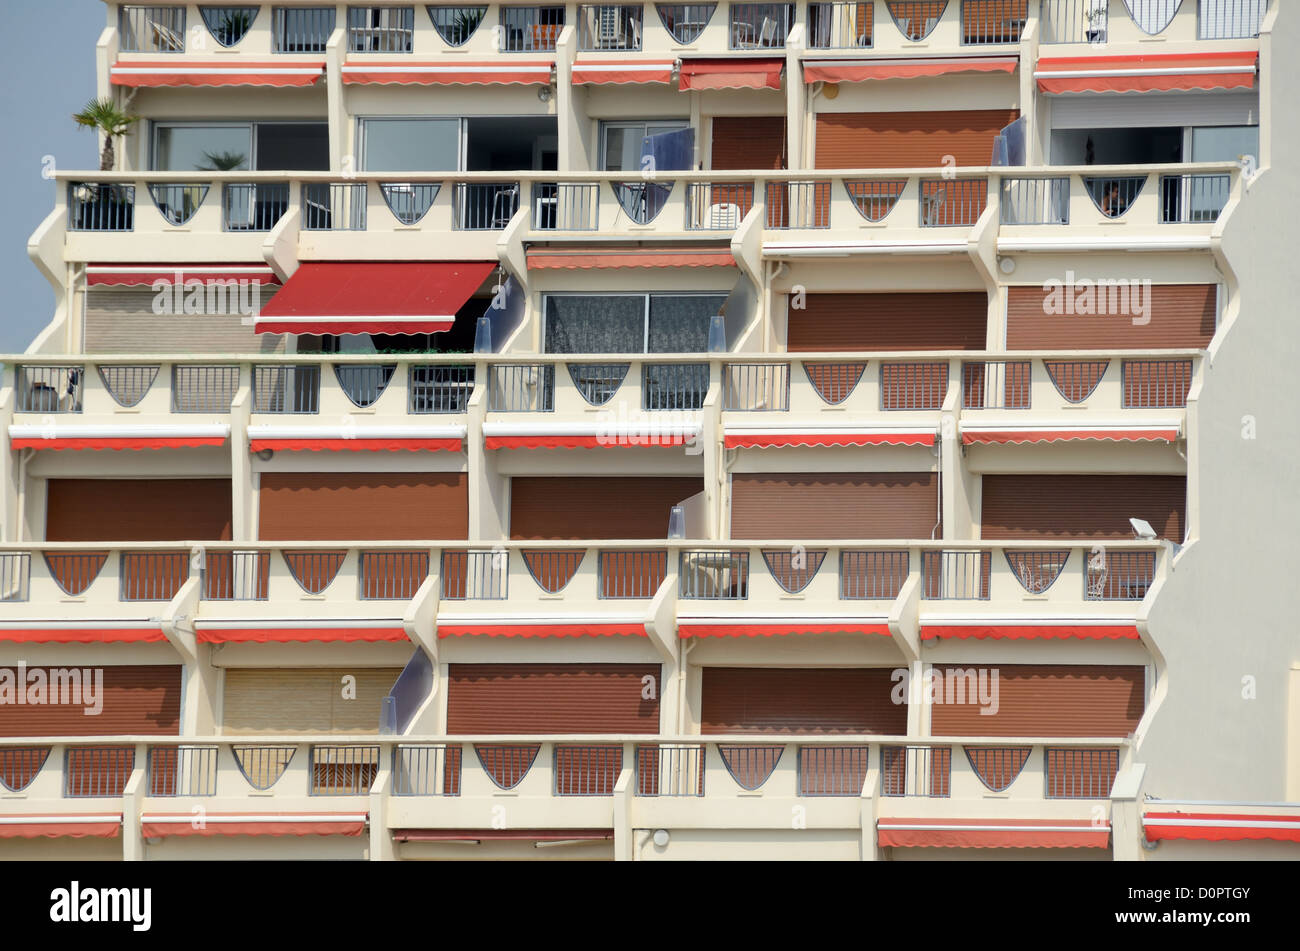 Facade, Window Patterns and Balconies of the Acapulco Apartment Building at La Grande-Motte Resort Town or New Town Hérault France Stock Photo